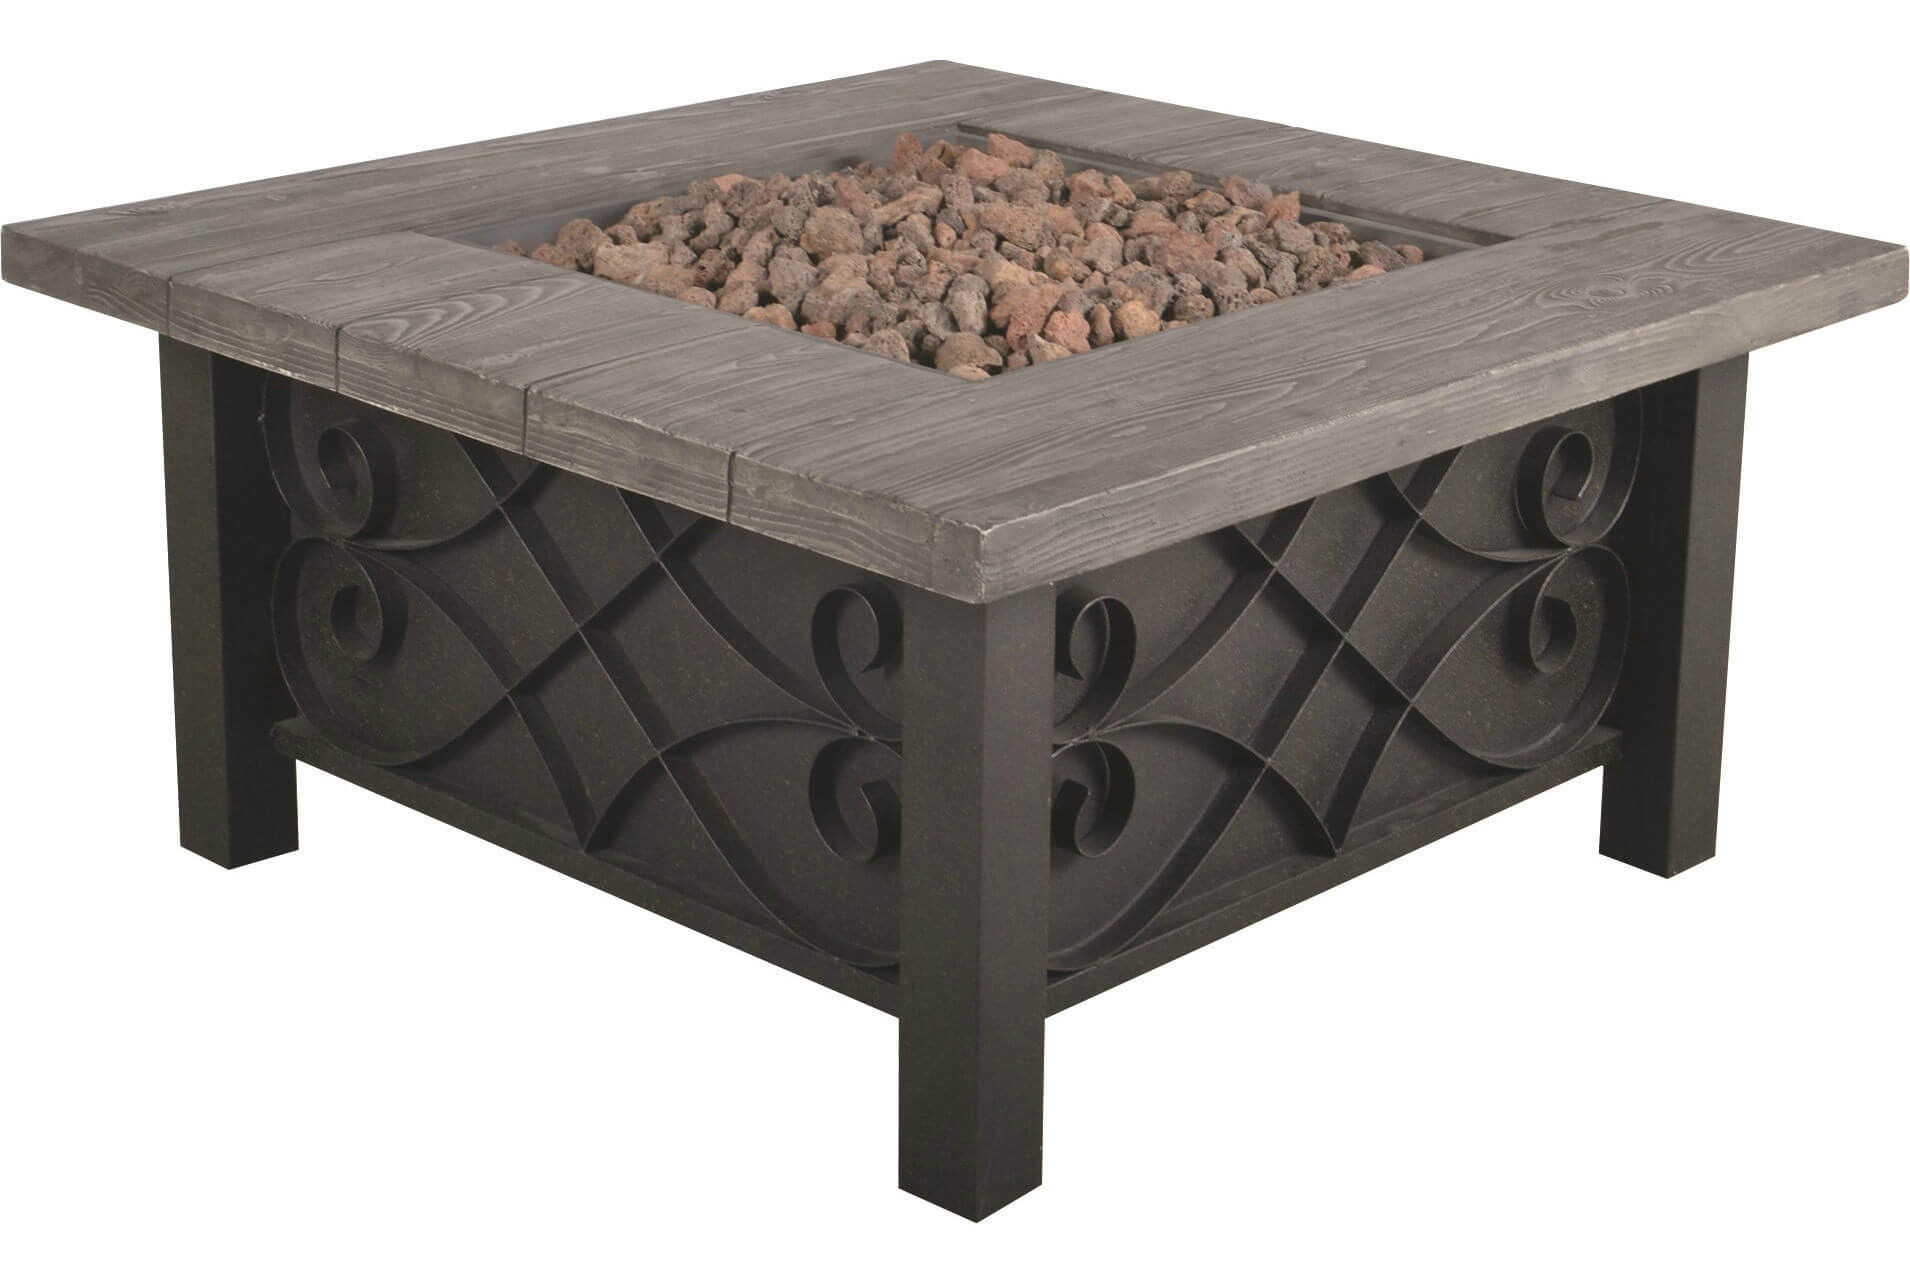 Patio Glow Fire Pit
 Top 15 Types of Propane Patio Fire Pits with Table Buying